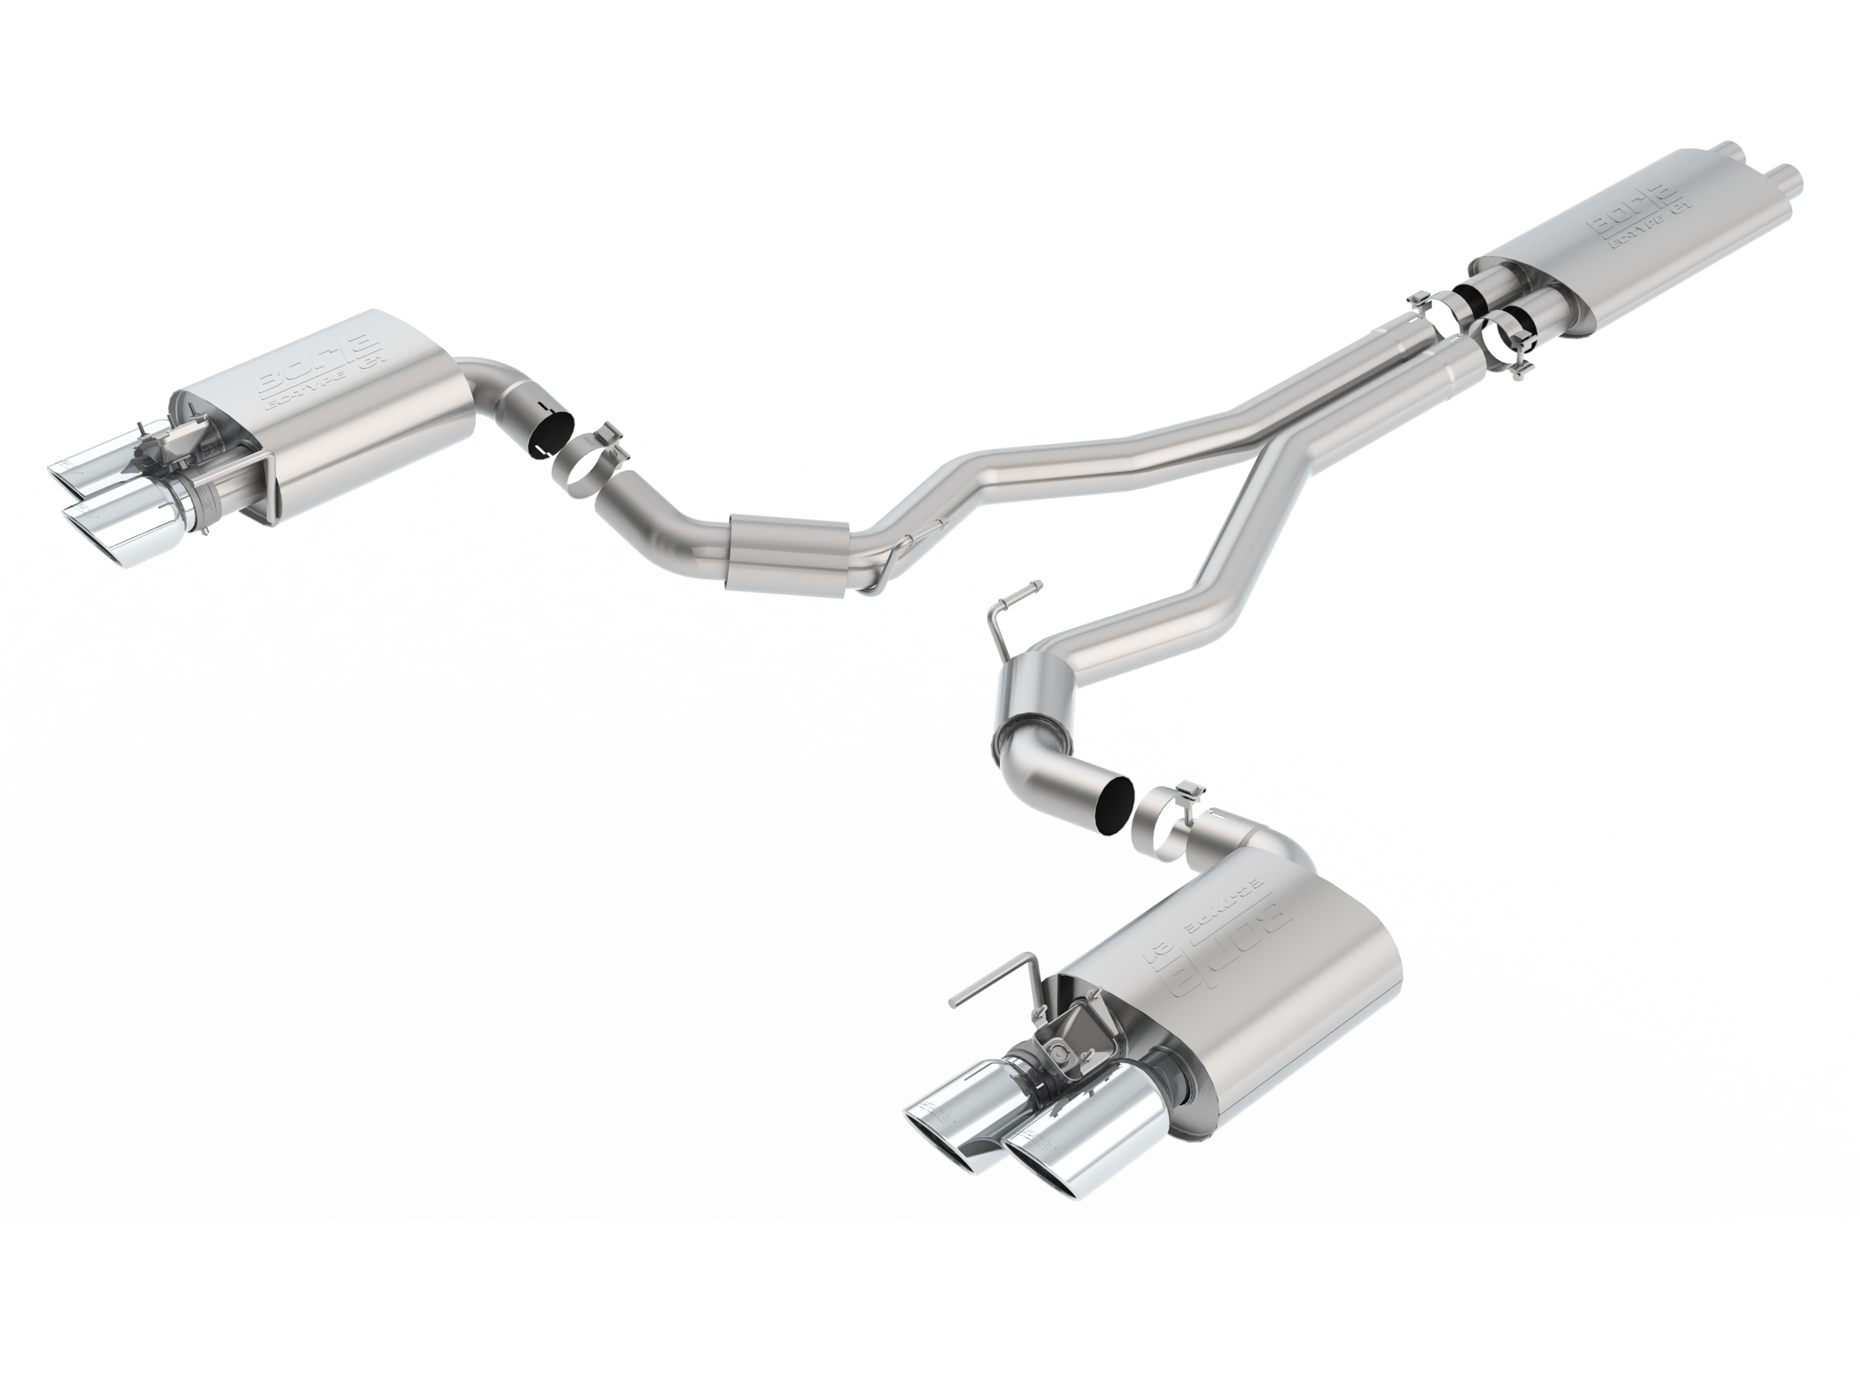 2018-2020 Ford Mustang GT Borla ECE Approved Touring Cat-Back Exhaust System w/Active Valves & Chrome Tips